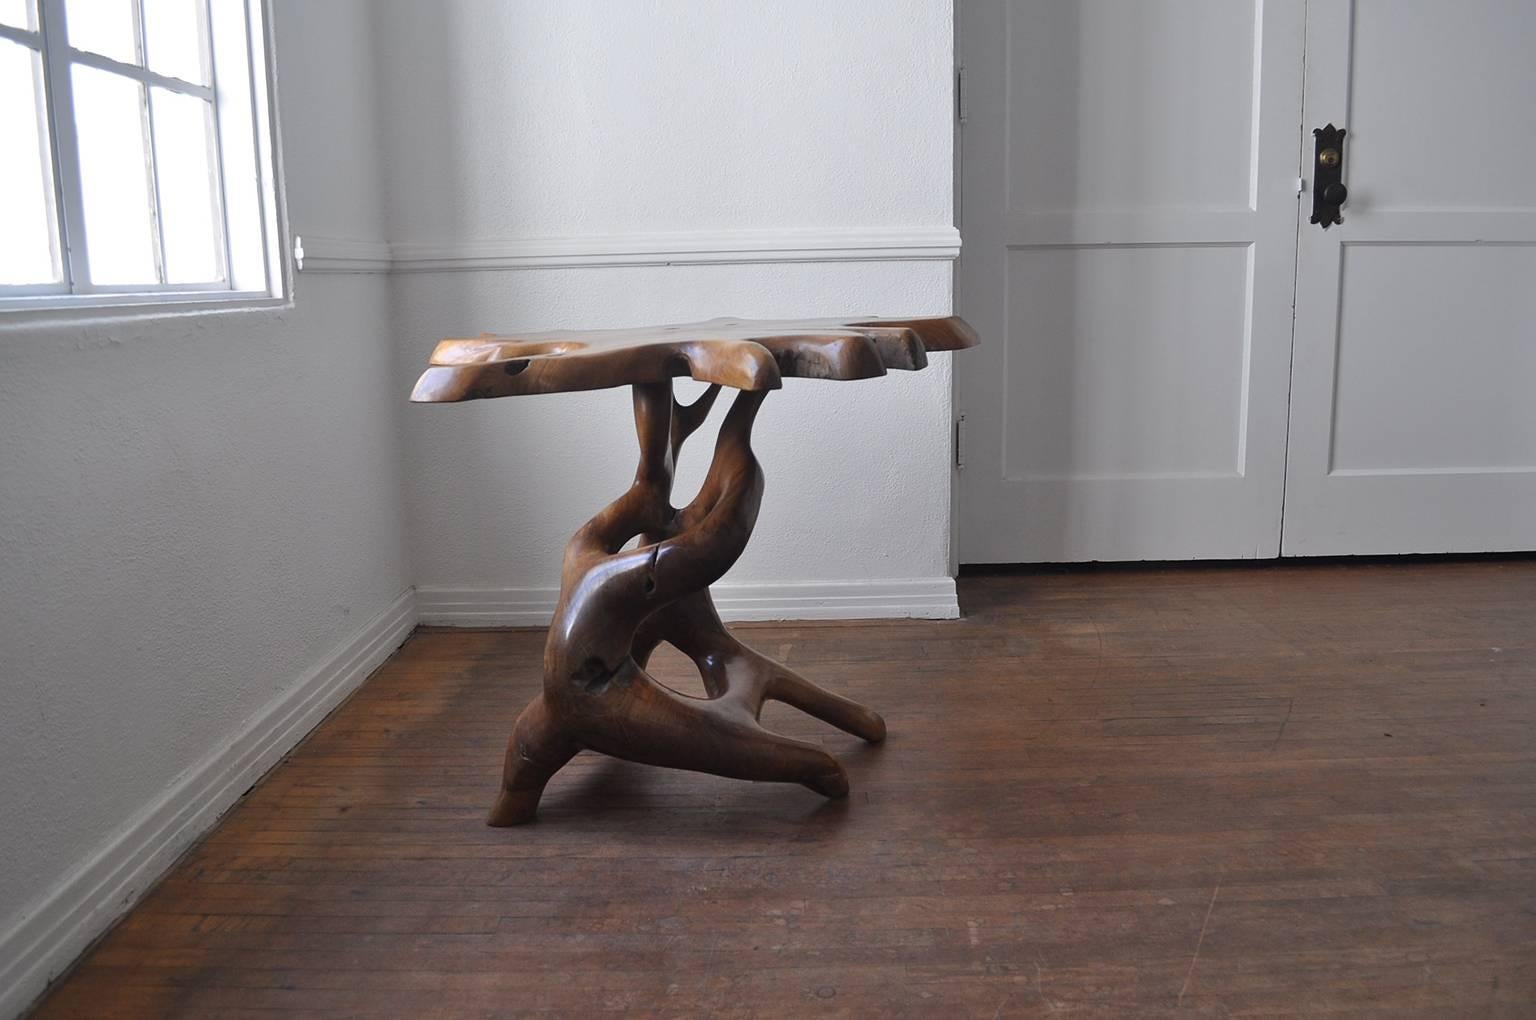 Exquisite natural organic form side table in teak. The base has the anamorphic essence of Henry Moore sculptures.